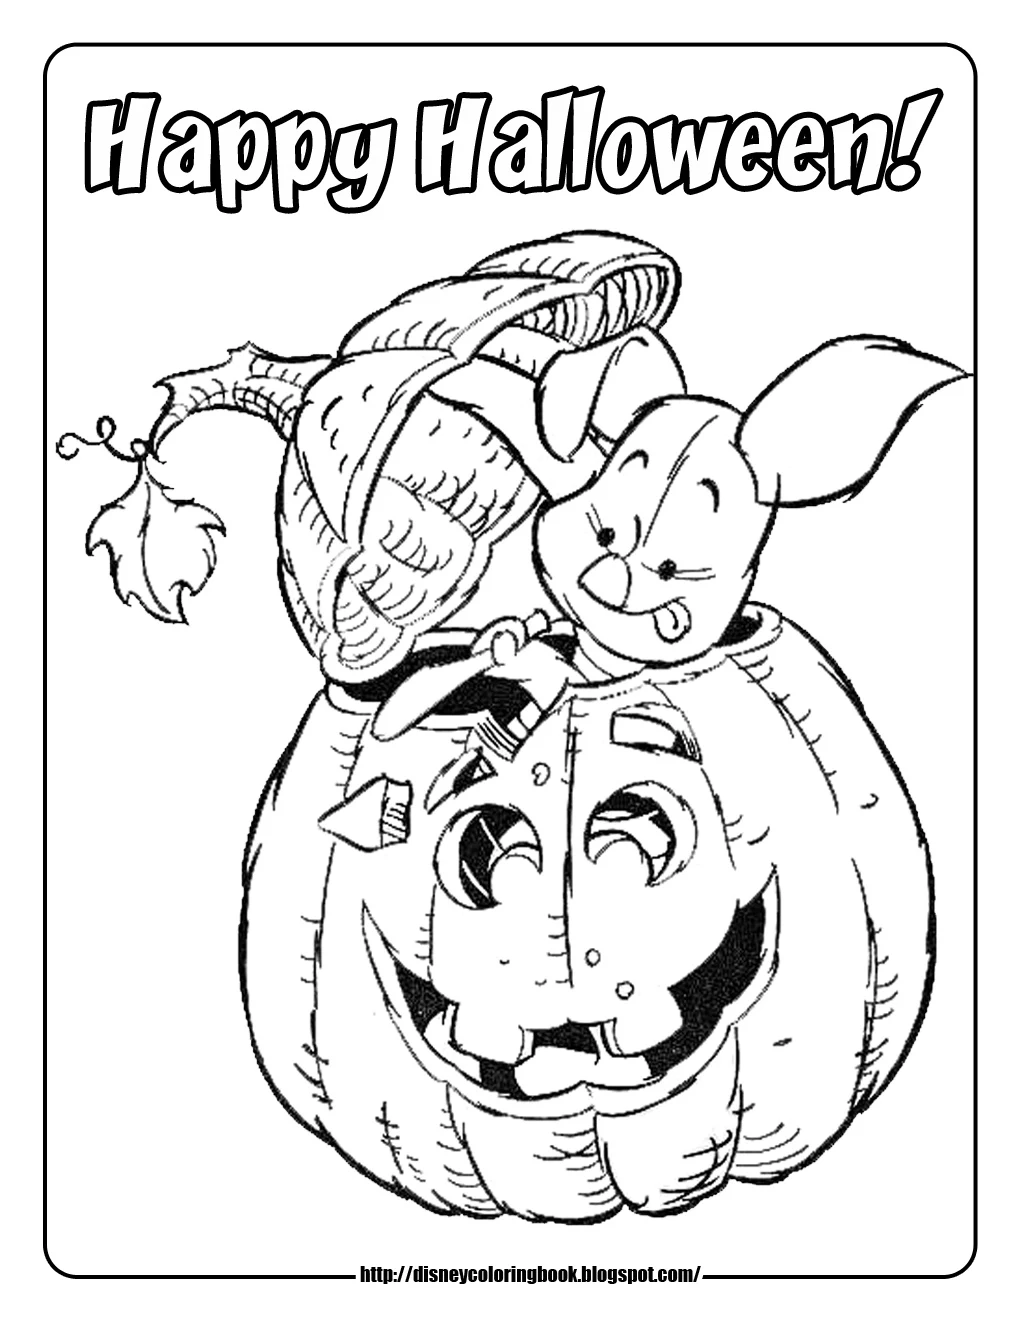 Disney Coloring Pages and Sheets for Kids Pooh and Friends Halloween 2